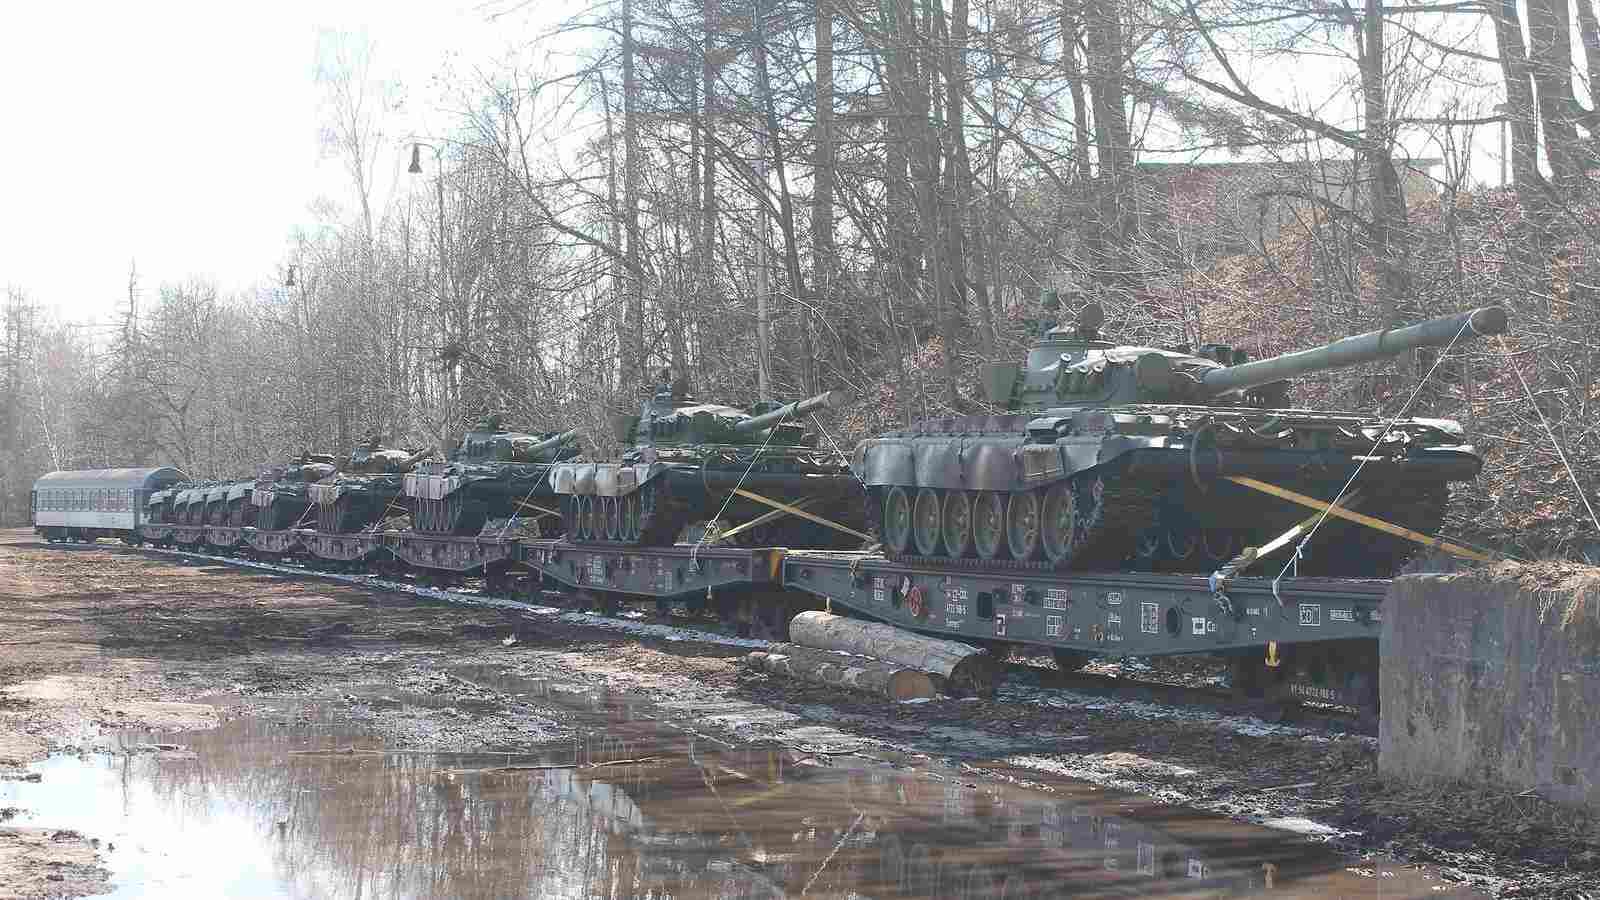 Photo: Five T-72s and four BMP-1s spotted being moved out of storage and loaded on a train in Czech Republic. Credit: MilitaryLand.net via Twitter.